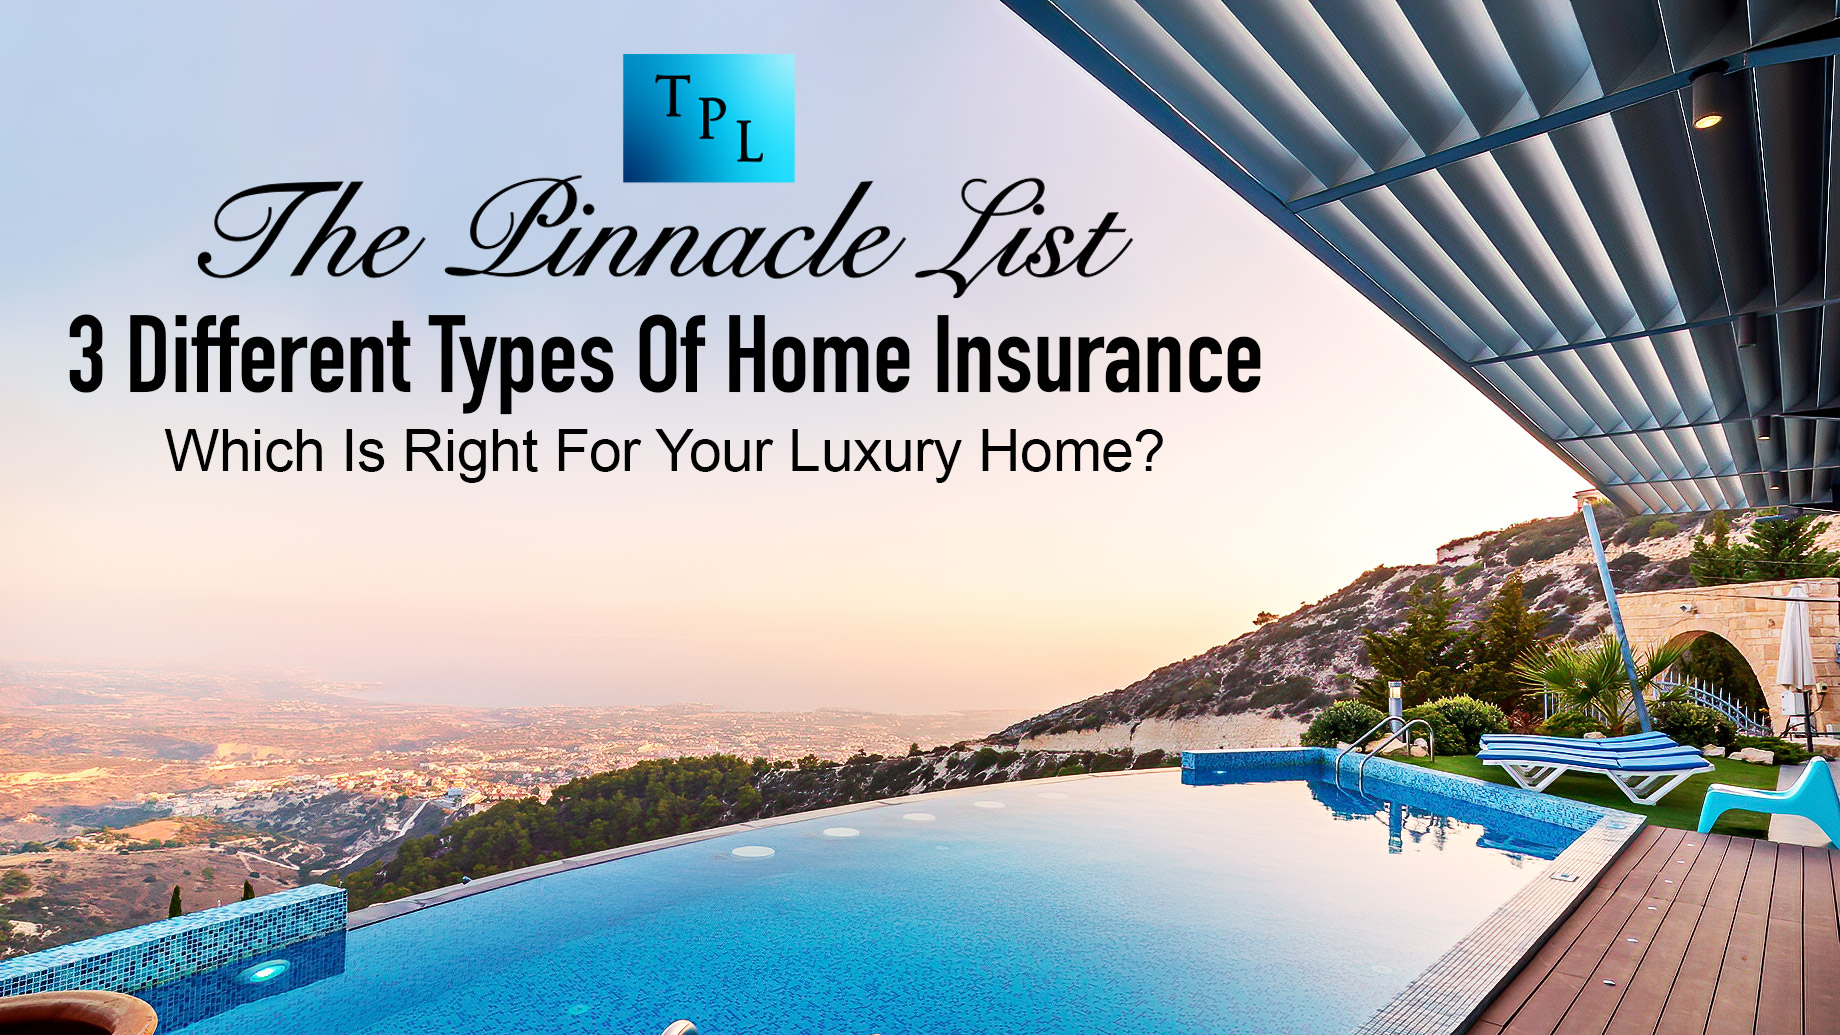 3 Different Types Of Home Insurance: Which Is Right For Your Luxury Home?